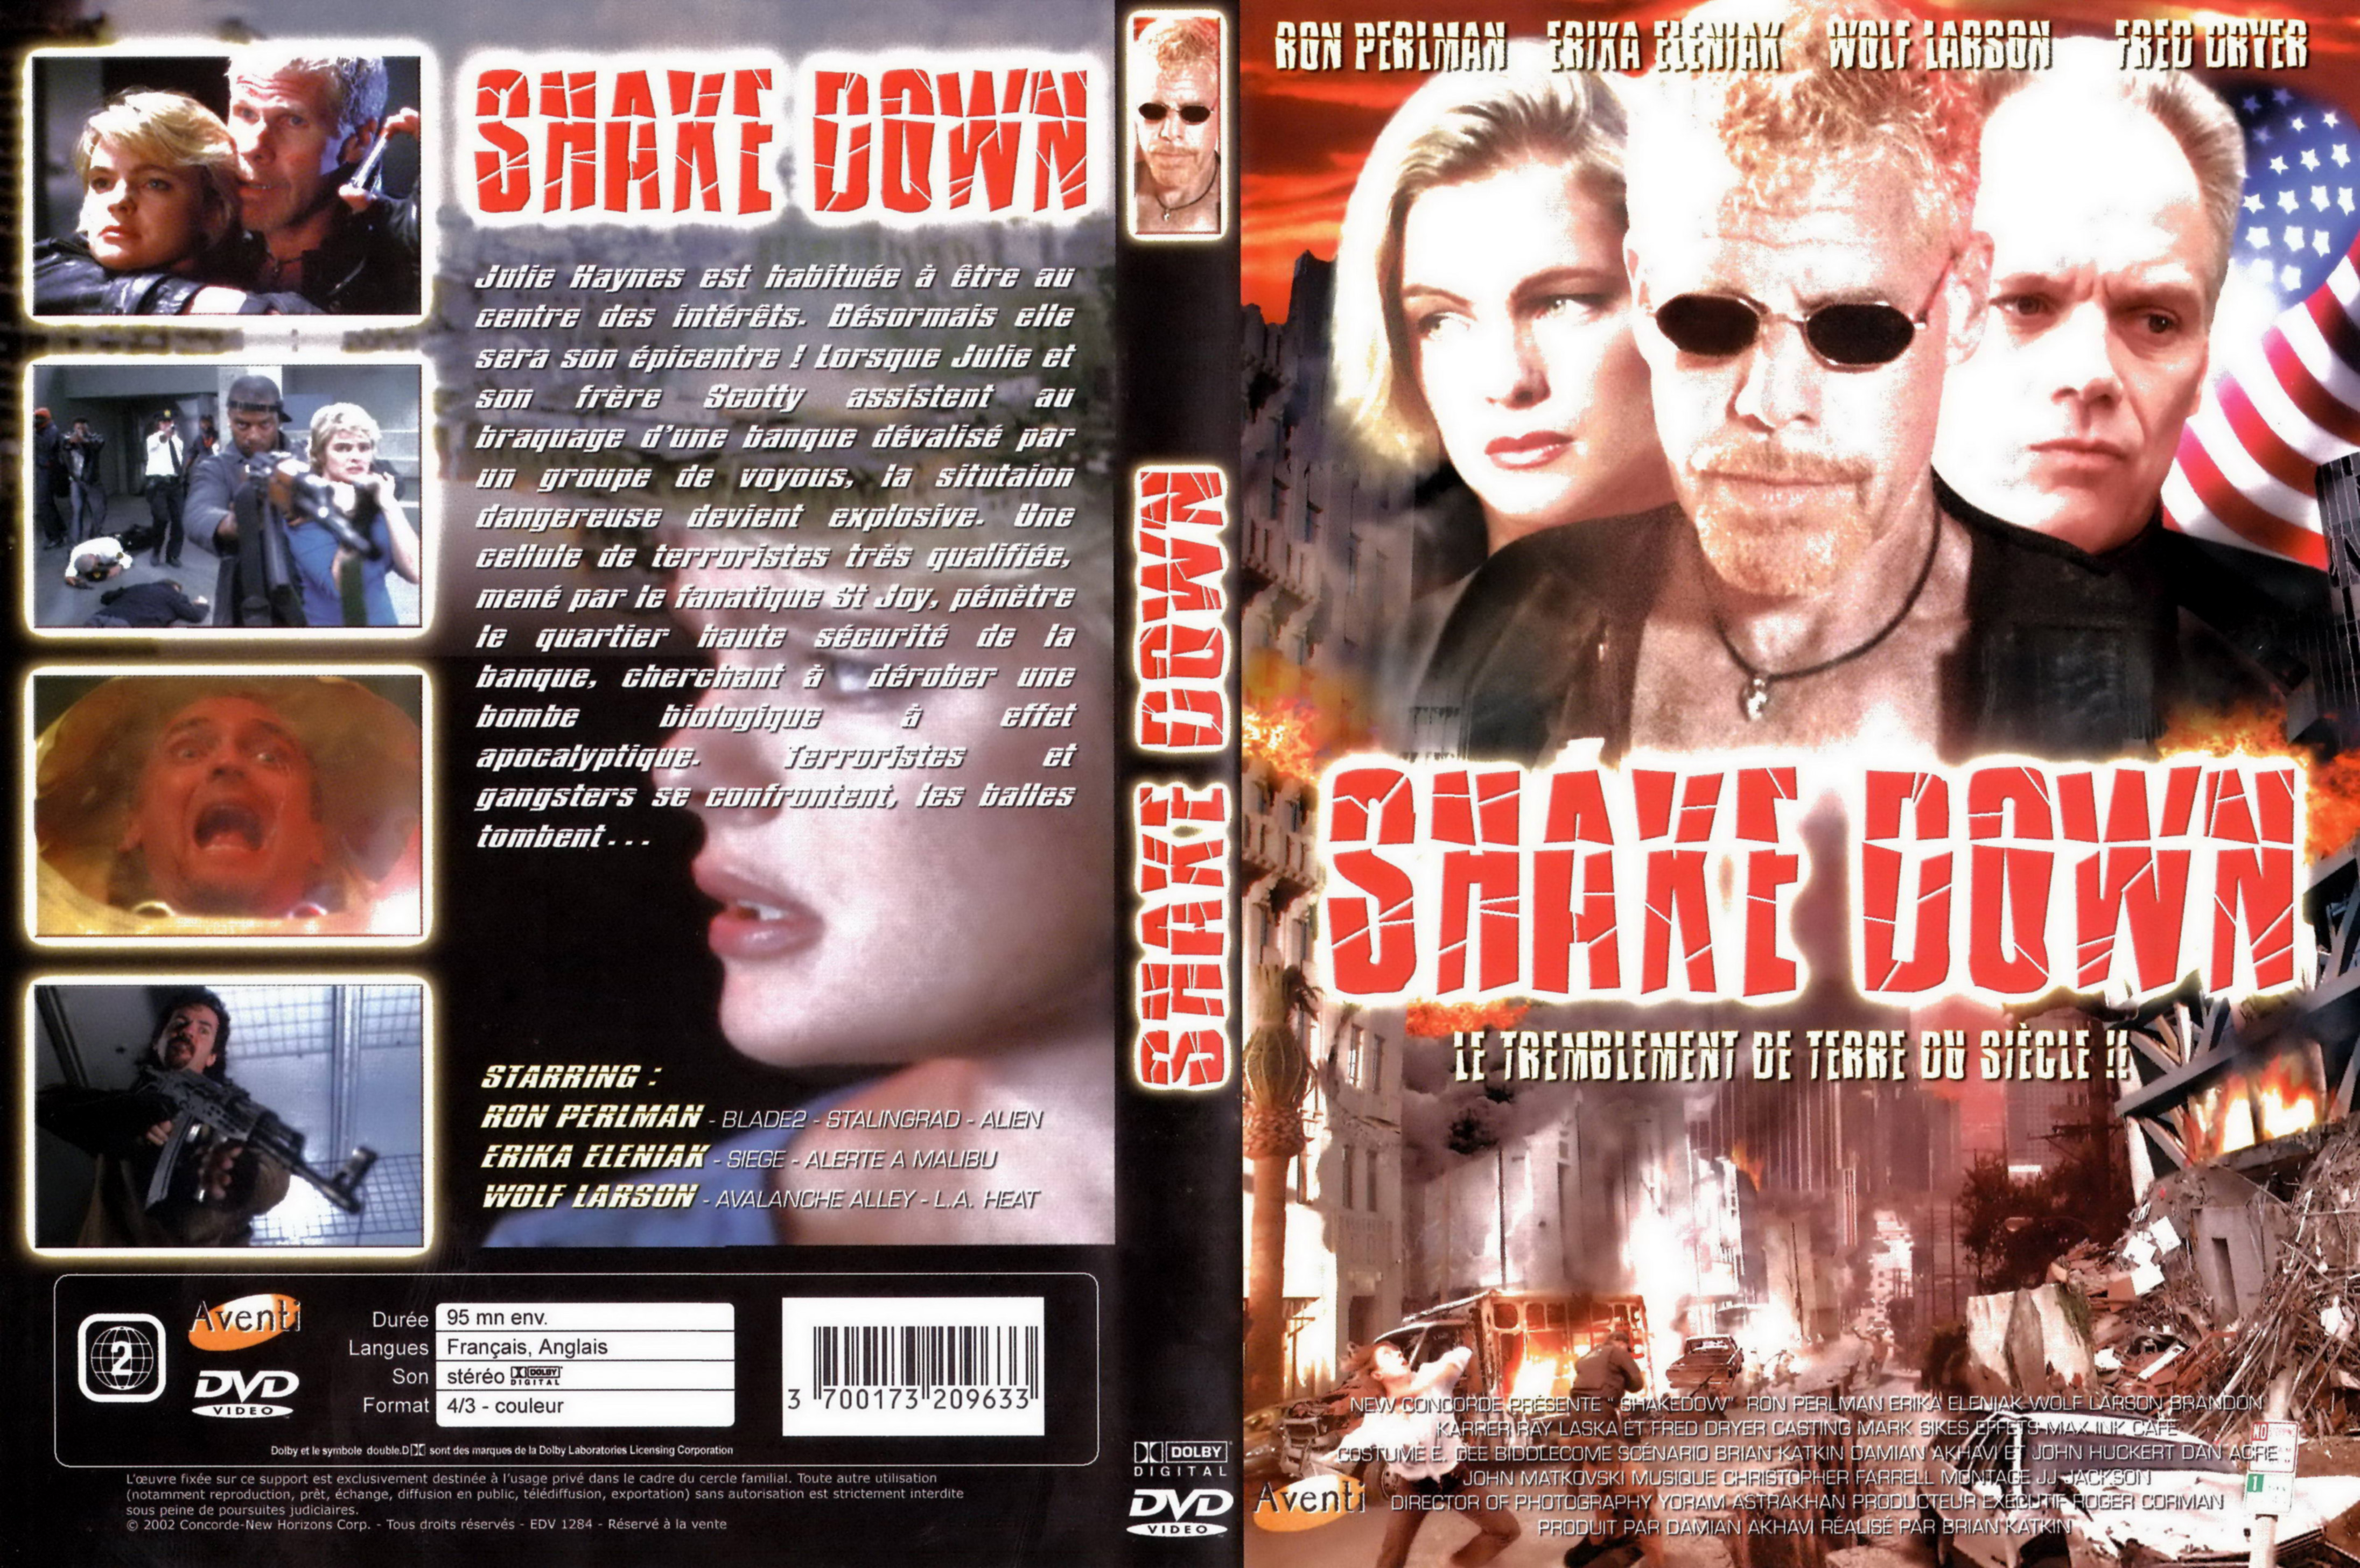 Jaquette DVD Shake down